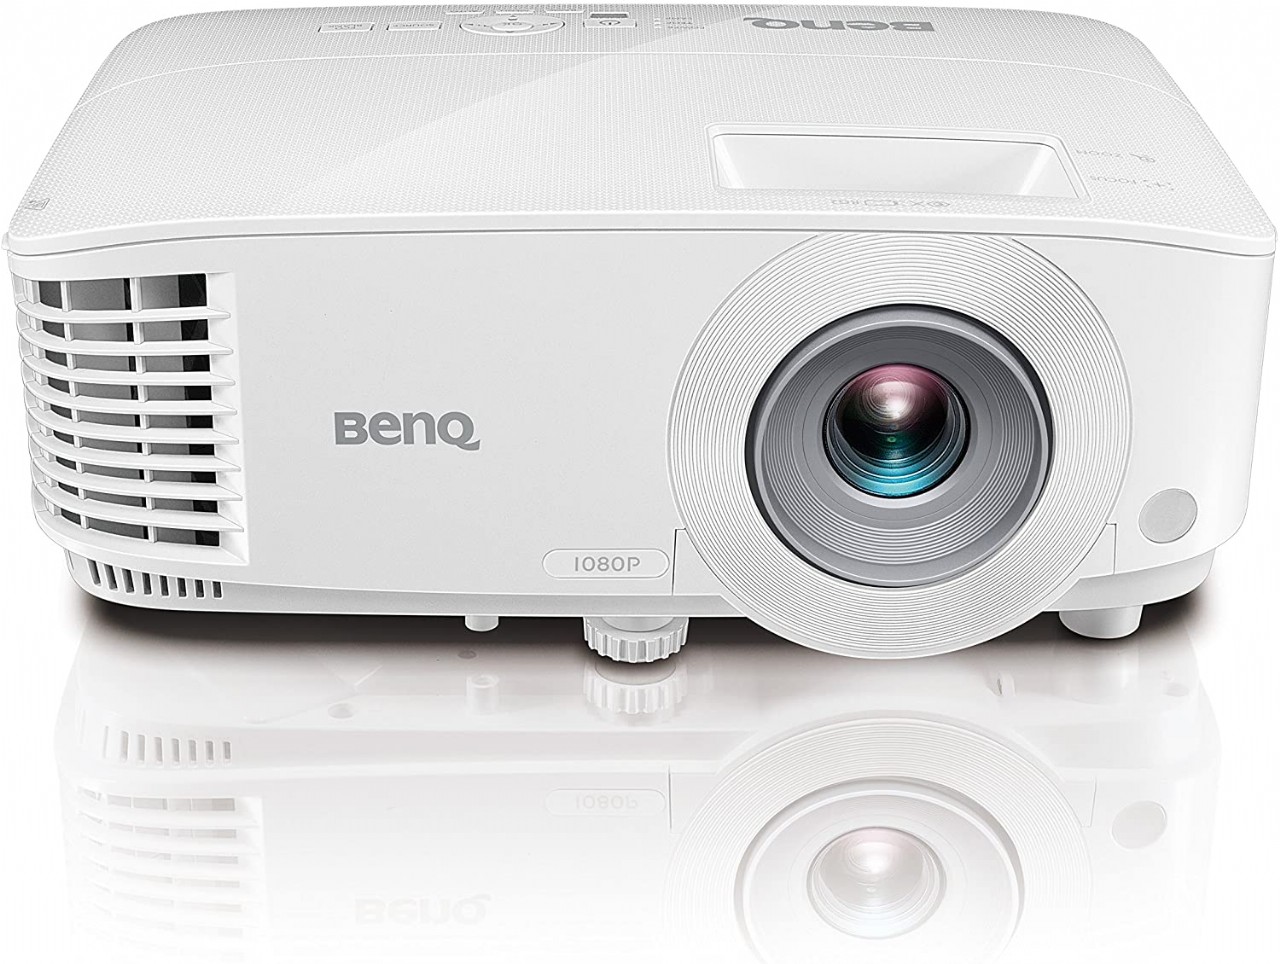 BenQ MH733 1080P Business Projector | 4000 Lumens for Lights On Enjoyment | 16,000:1 Contrast Ratio